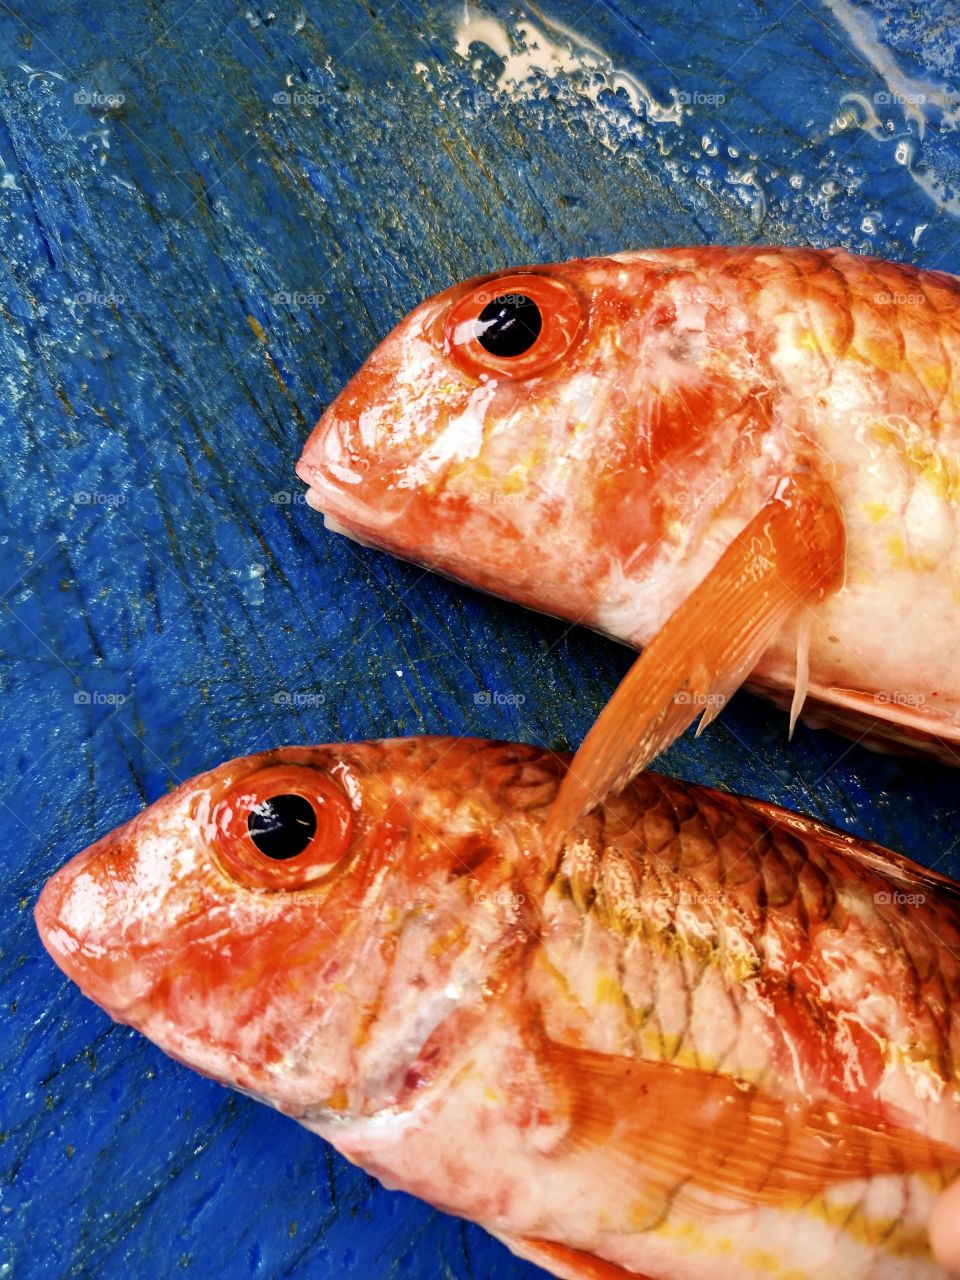 Two red fish on the blue countertop